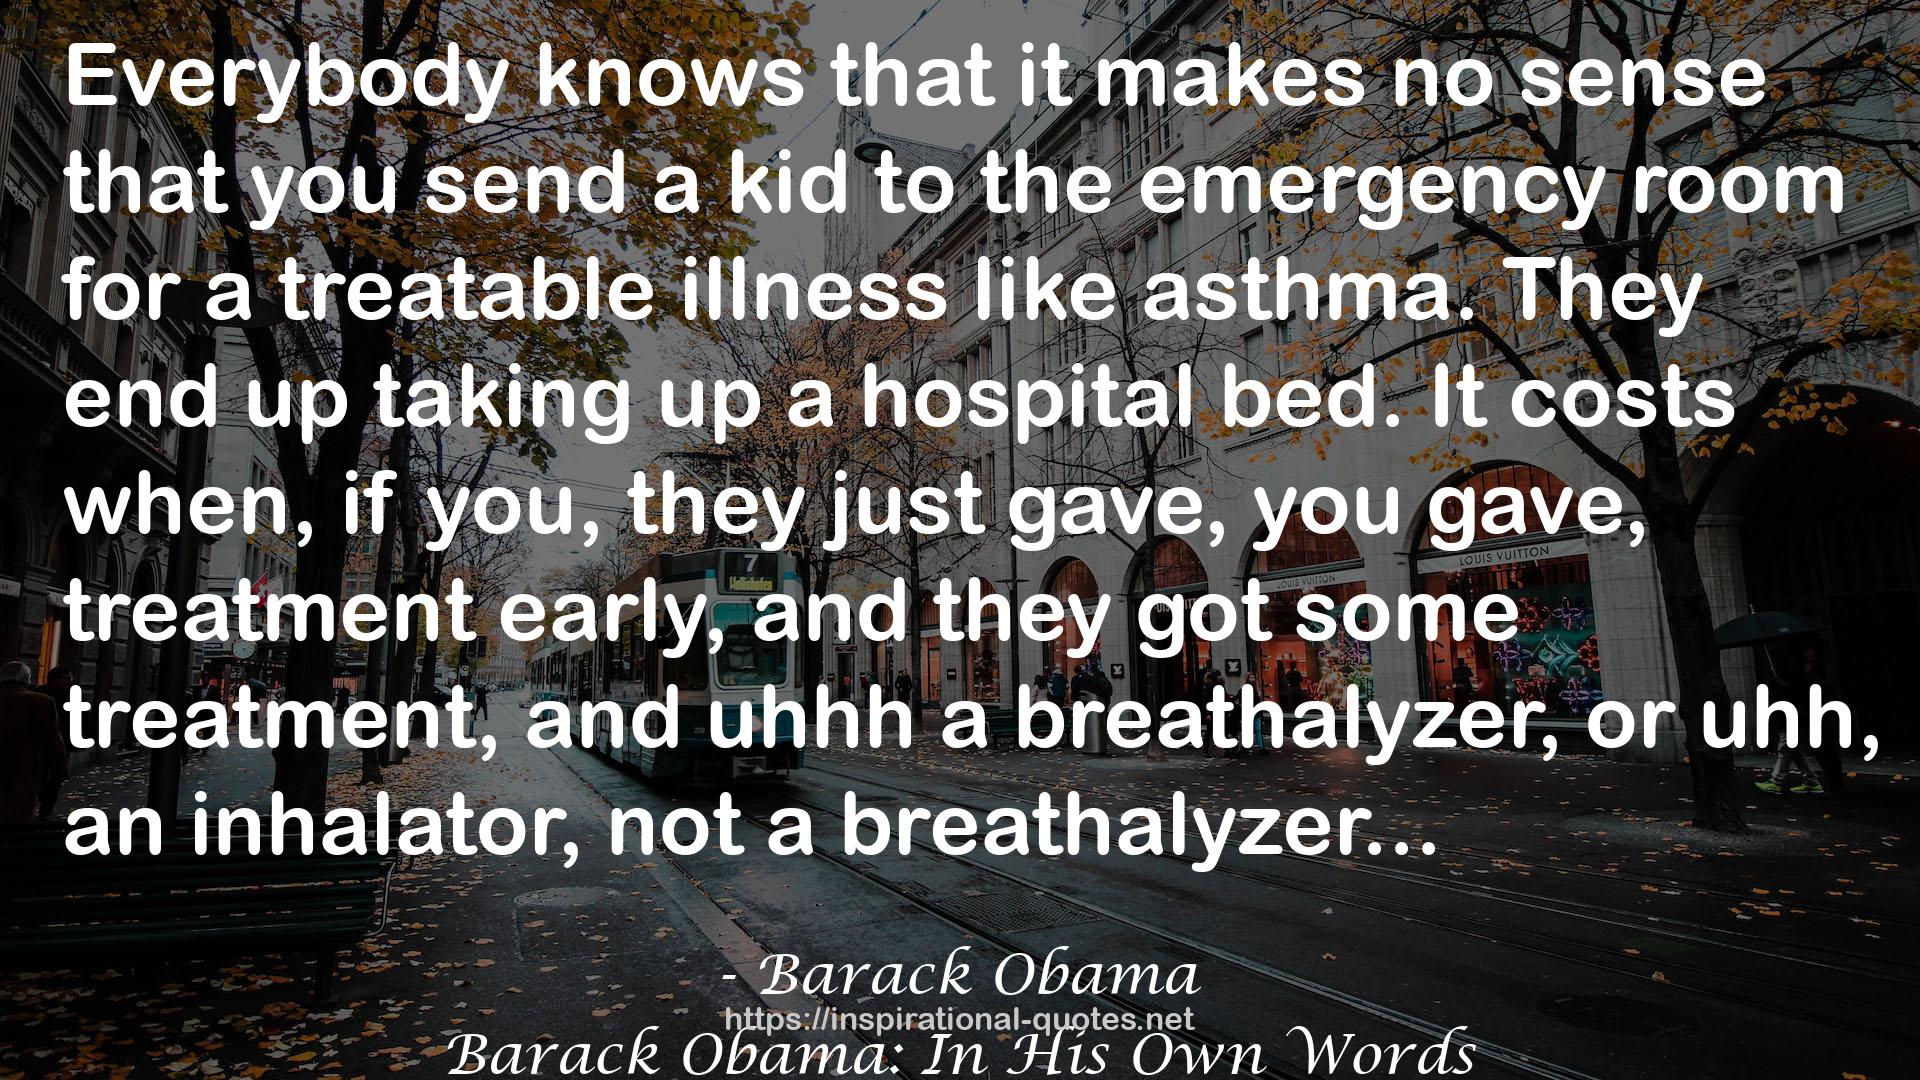 Barack Obama: In His Own Words QUOTES